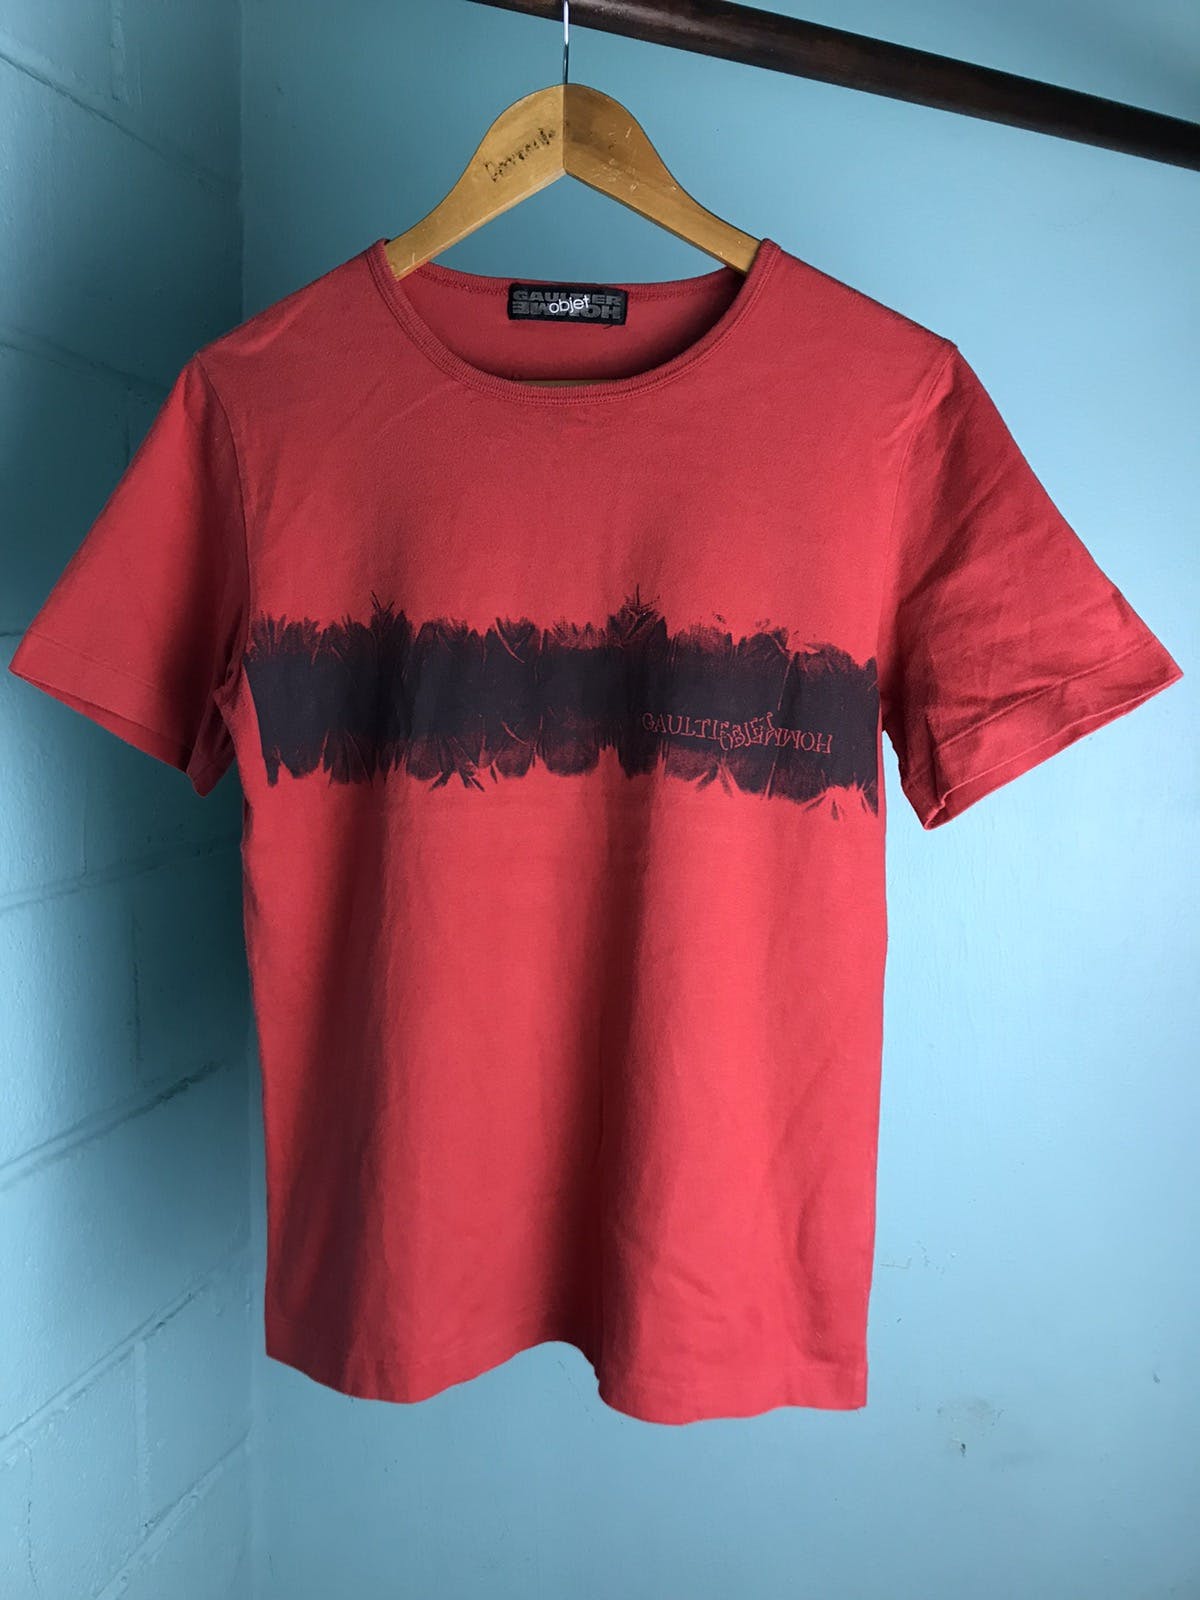 Vintage Gaultier Homme Object tee - 5